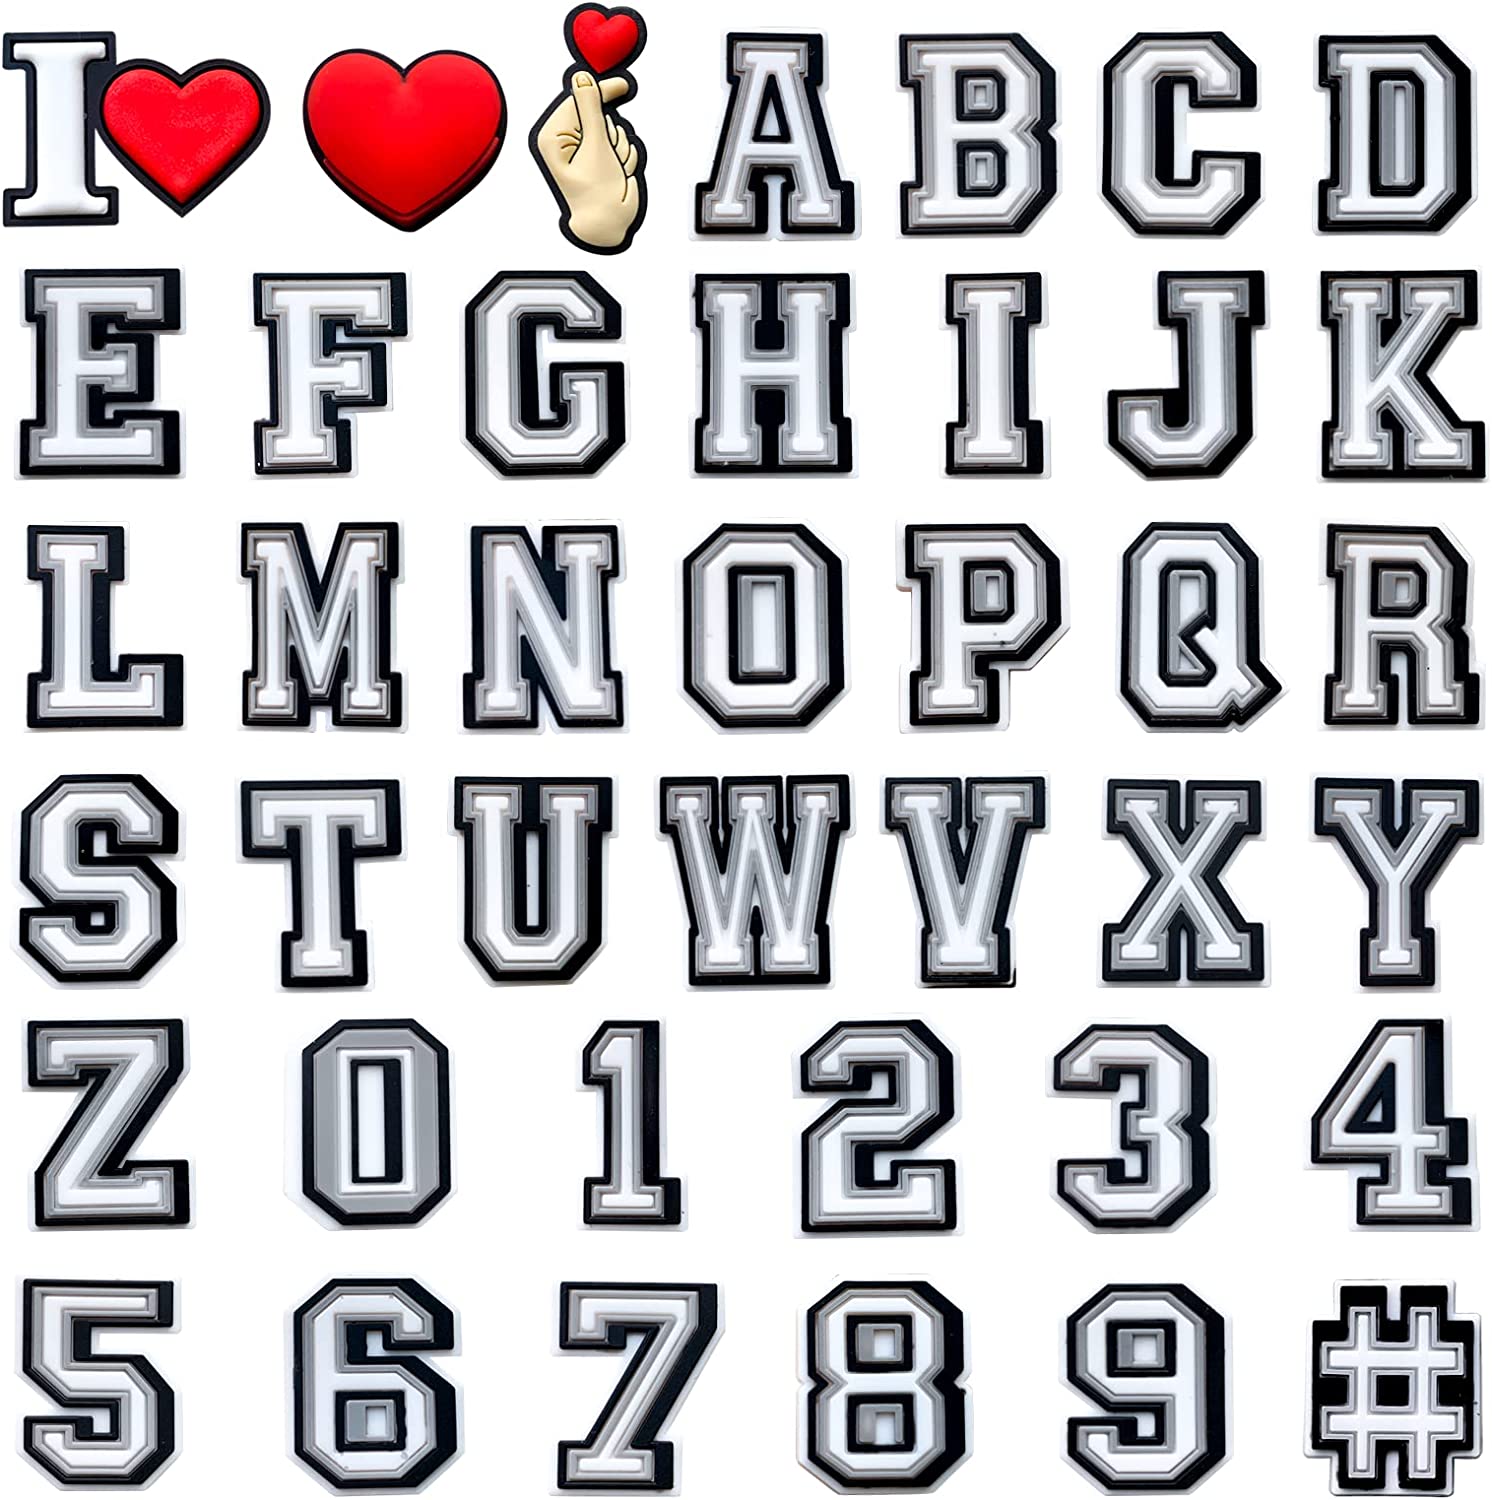  37 Pack Pink Letter Decoration Charms 0-9# Number, Alphabet  ABC-Z Letter, DIY for Boy Girl Teens Men Women and Adults : Clothing, Shoes  & Jewelry